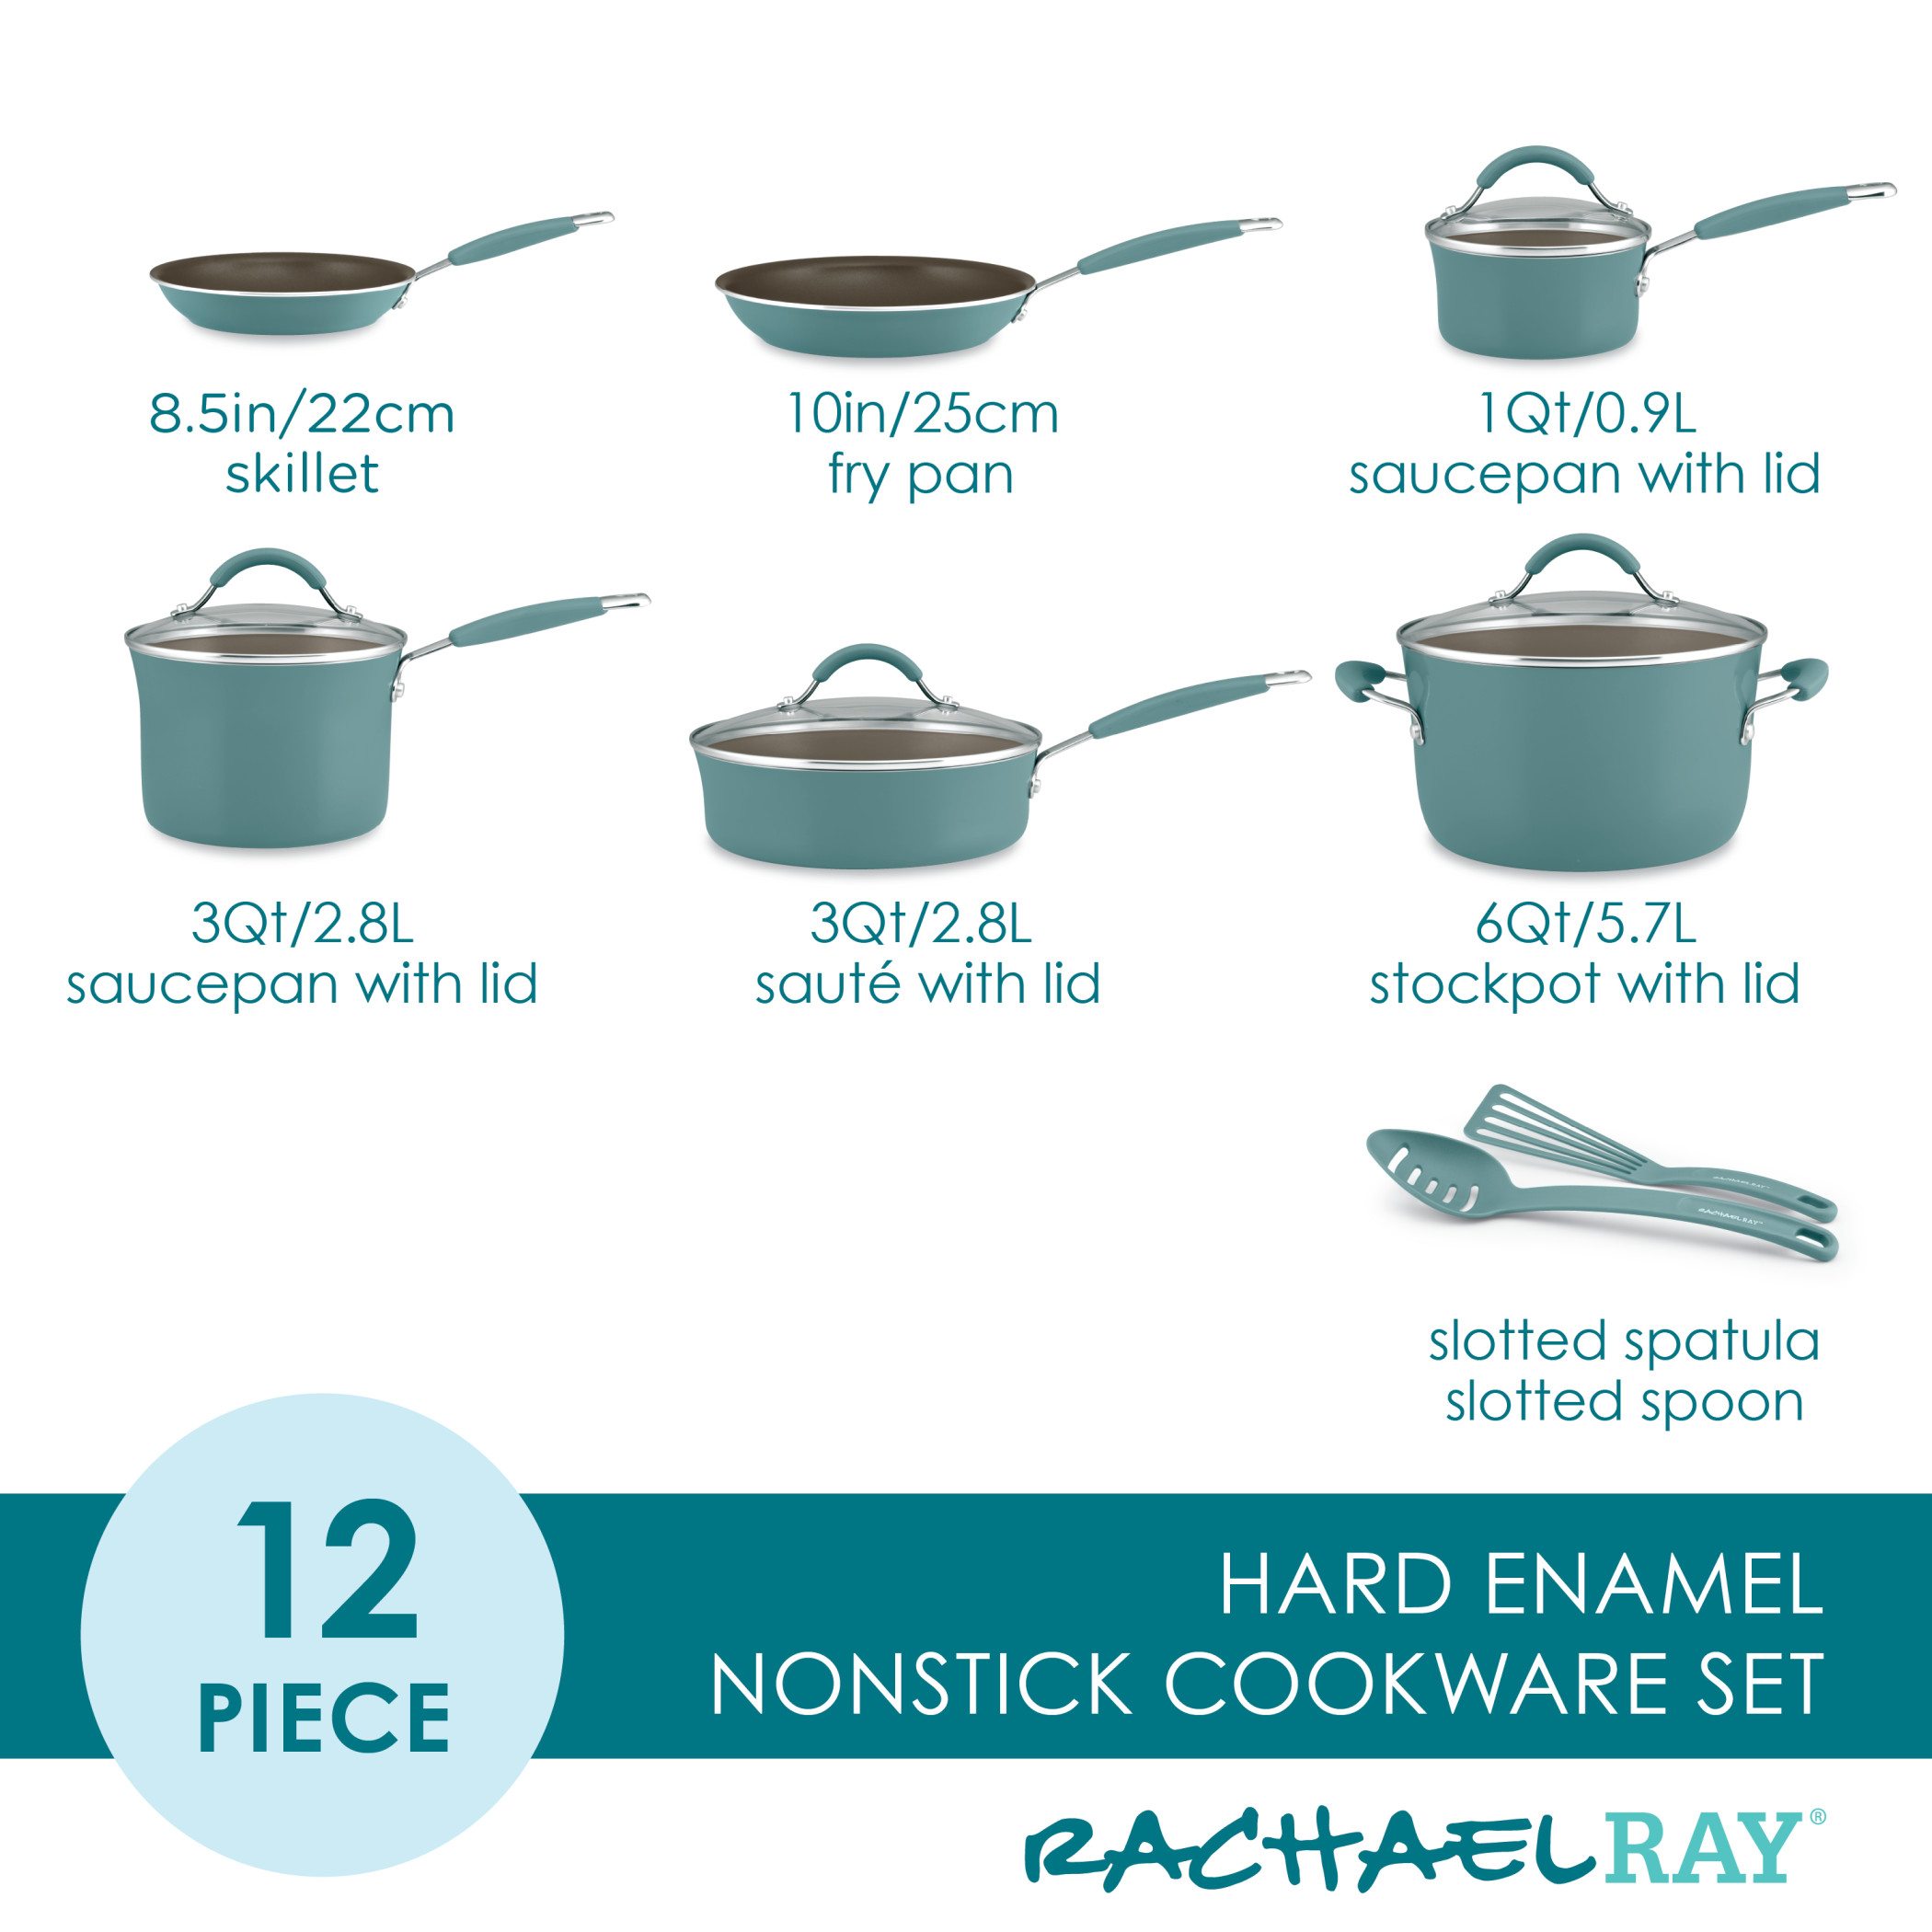 Rachael Ray Cucina 12 Piece Hard Porcelain Enamel Nonstick Pots and Pans Set, Agave Blue - image 5 of 7